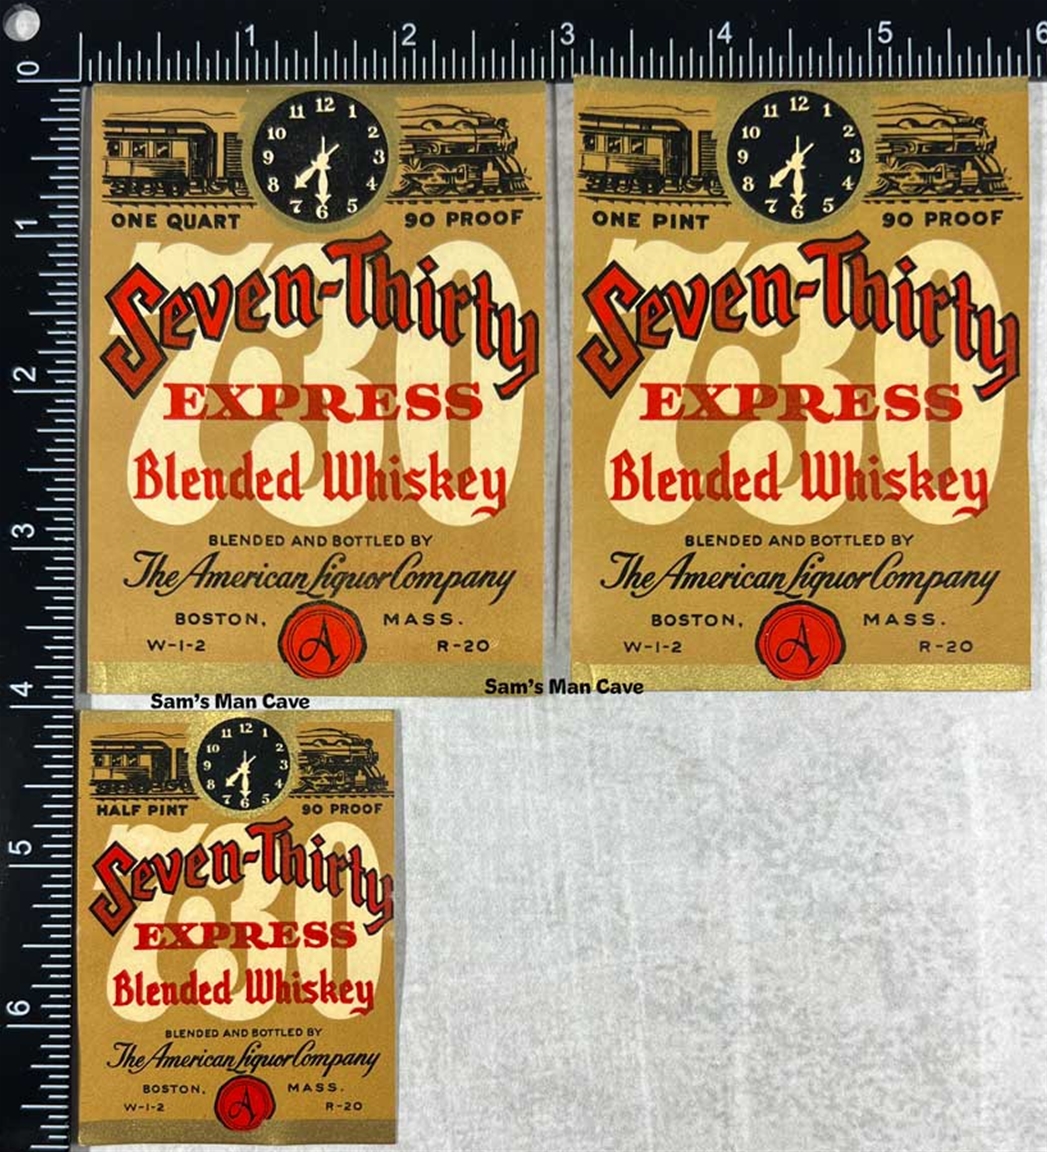 Seven-Thirty Express Blended Whiskey Label Set